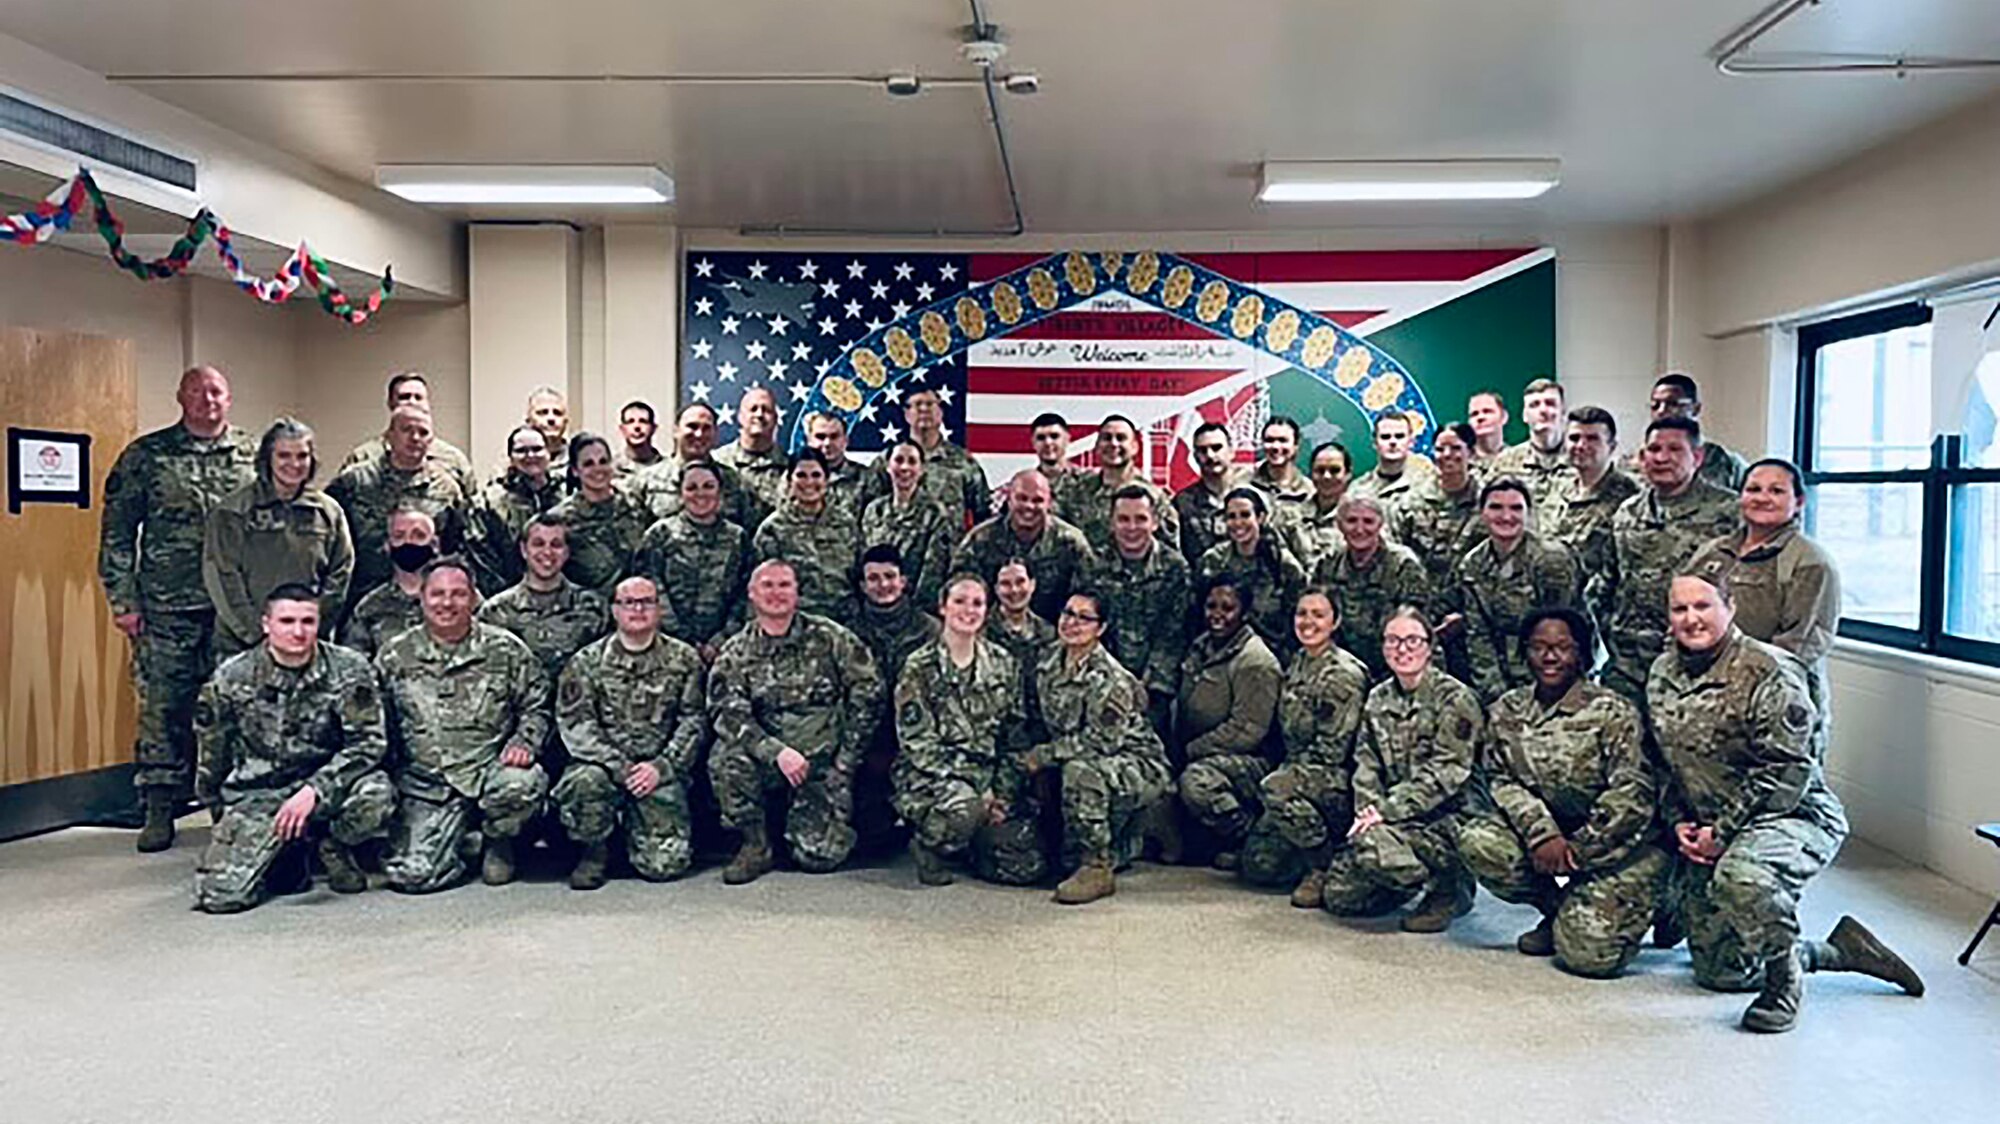 Group photo of about 40 United States Air Force members posing before an "Operation Allies Welcome" banner. The banner depicts a gateway, the U.S. flag and the Afghanistan flag.